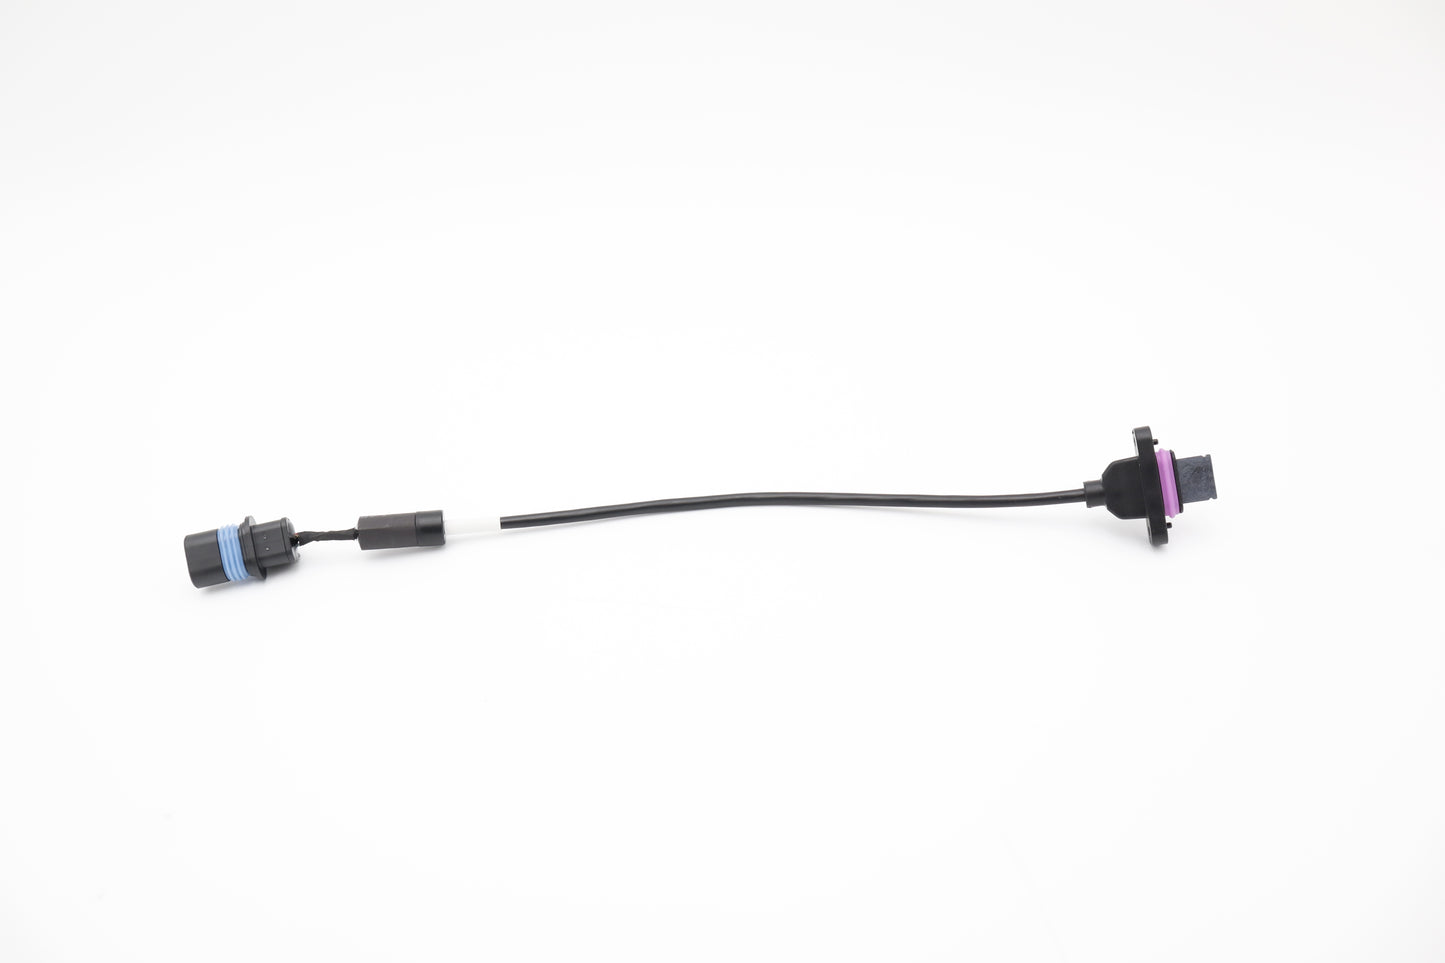 DJI Agras T40 Flow Meter Signal Cable